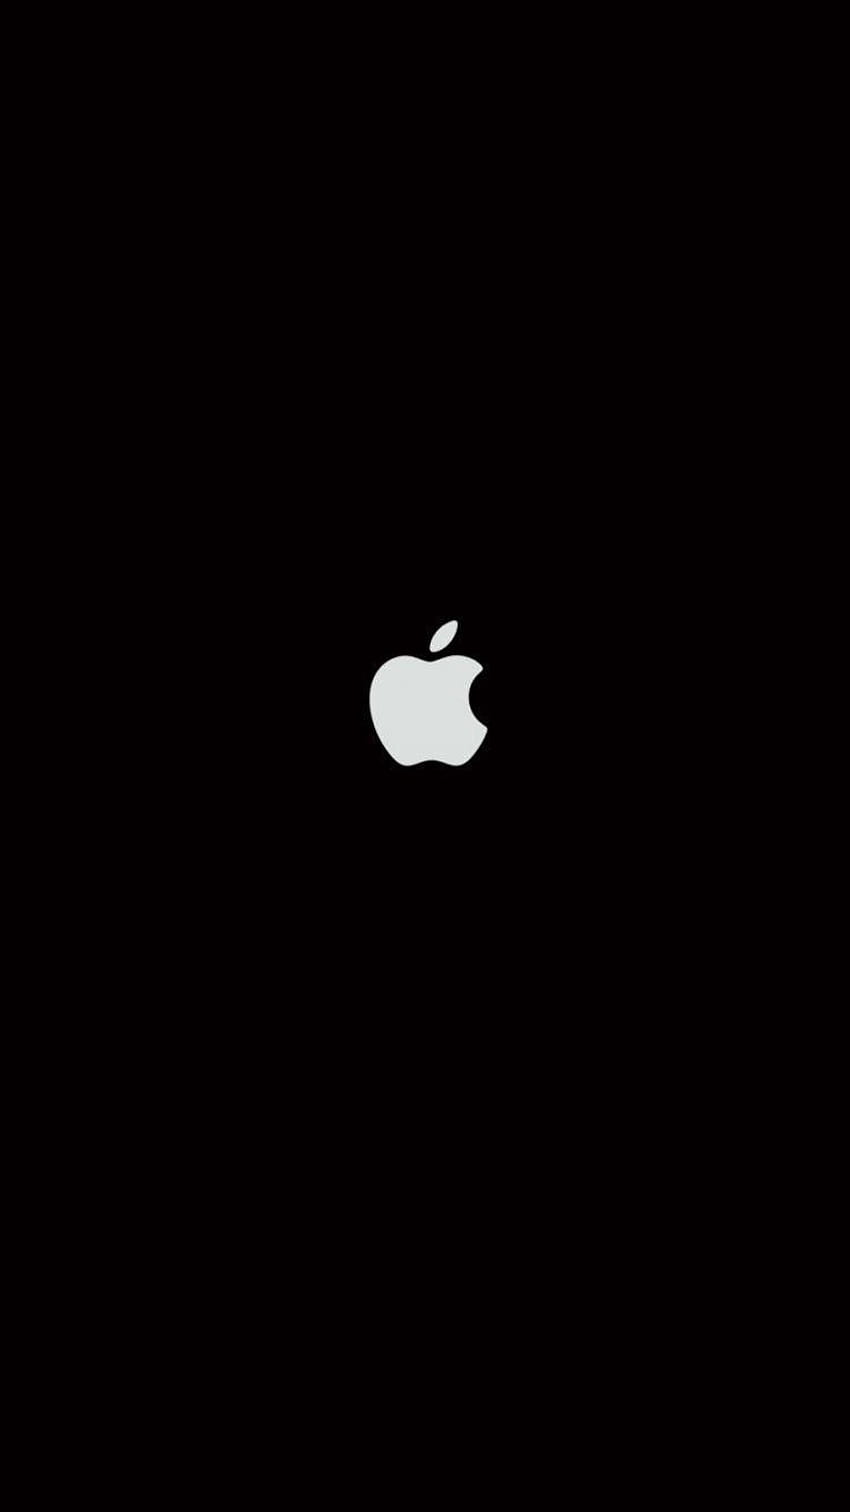 10 Top Black Apple Logo FULL 1920×1080 For PC, adidas and nike HD phone ...